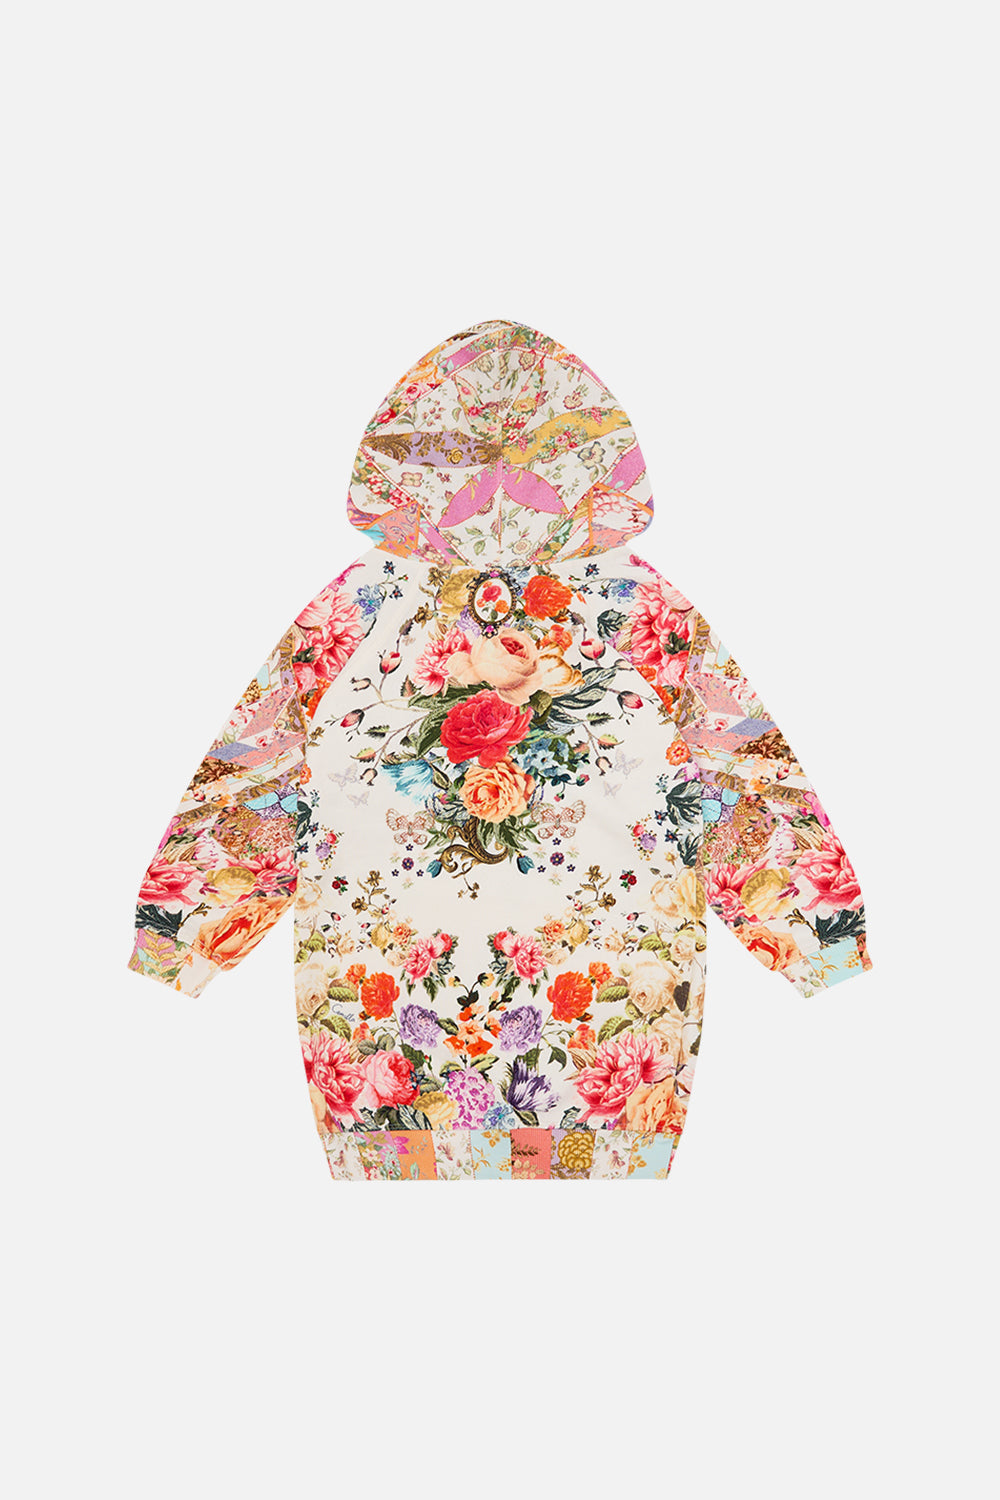 Milla by CAMILLA floral kids hoodie dress (4-10) in Sew Yesterday